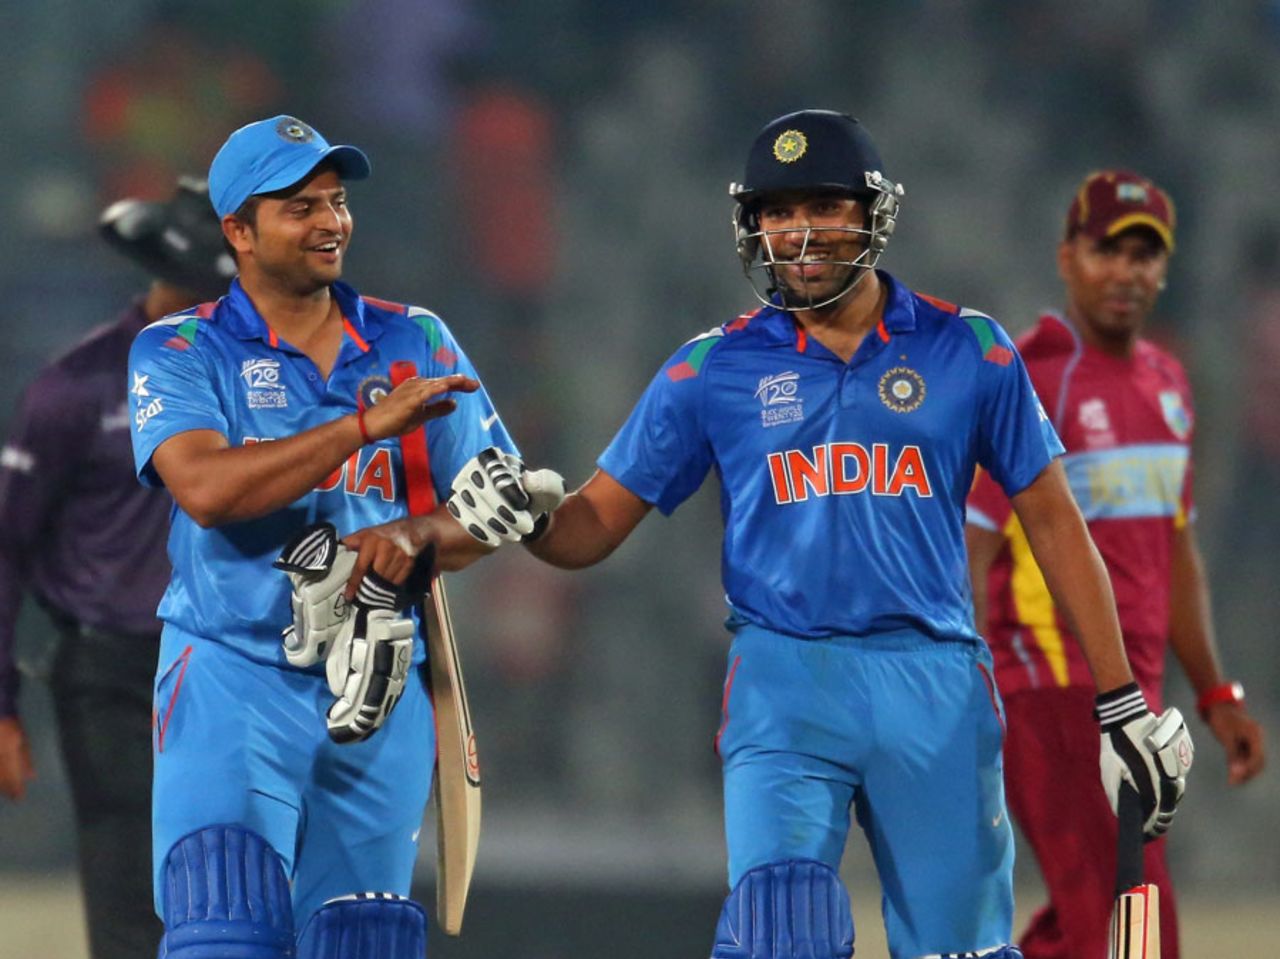 Suresh Raina and Rohit Sharma walk off after India's win,  India v West Indies, World T20, Group 2, Mirpur, March 23, 2014